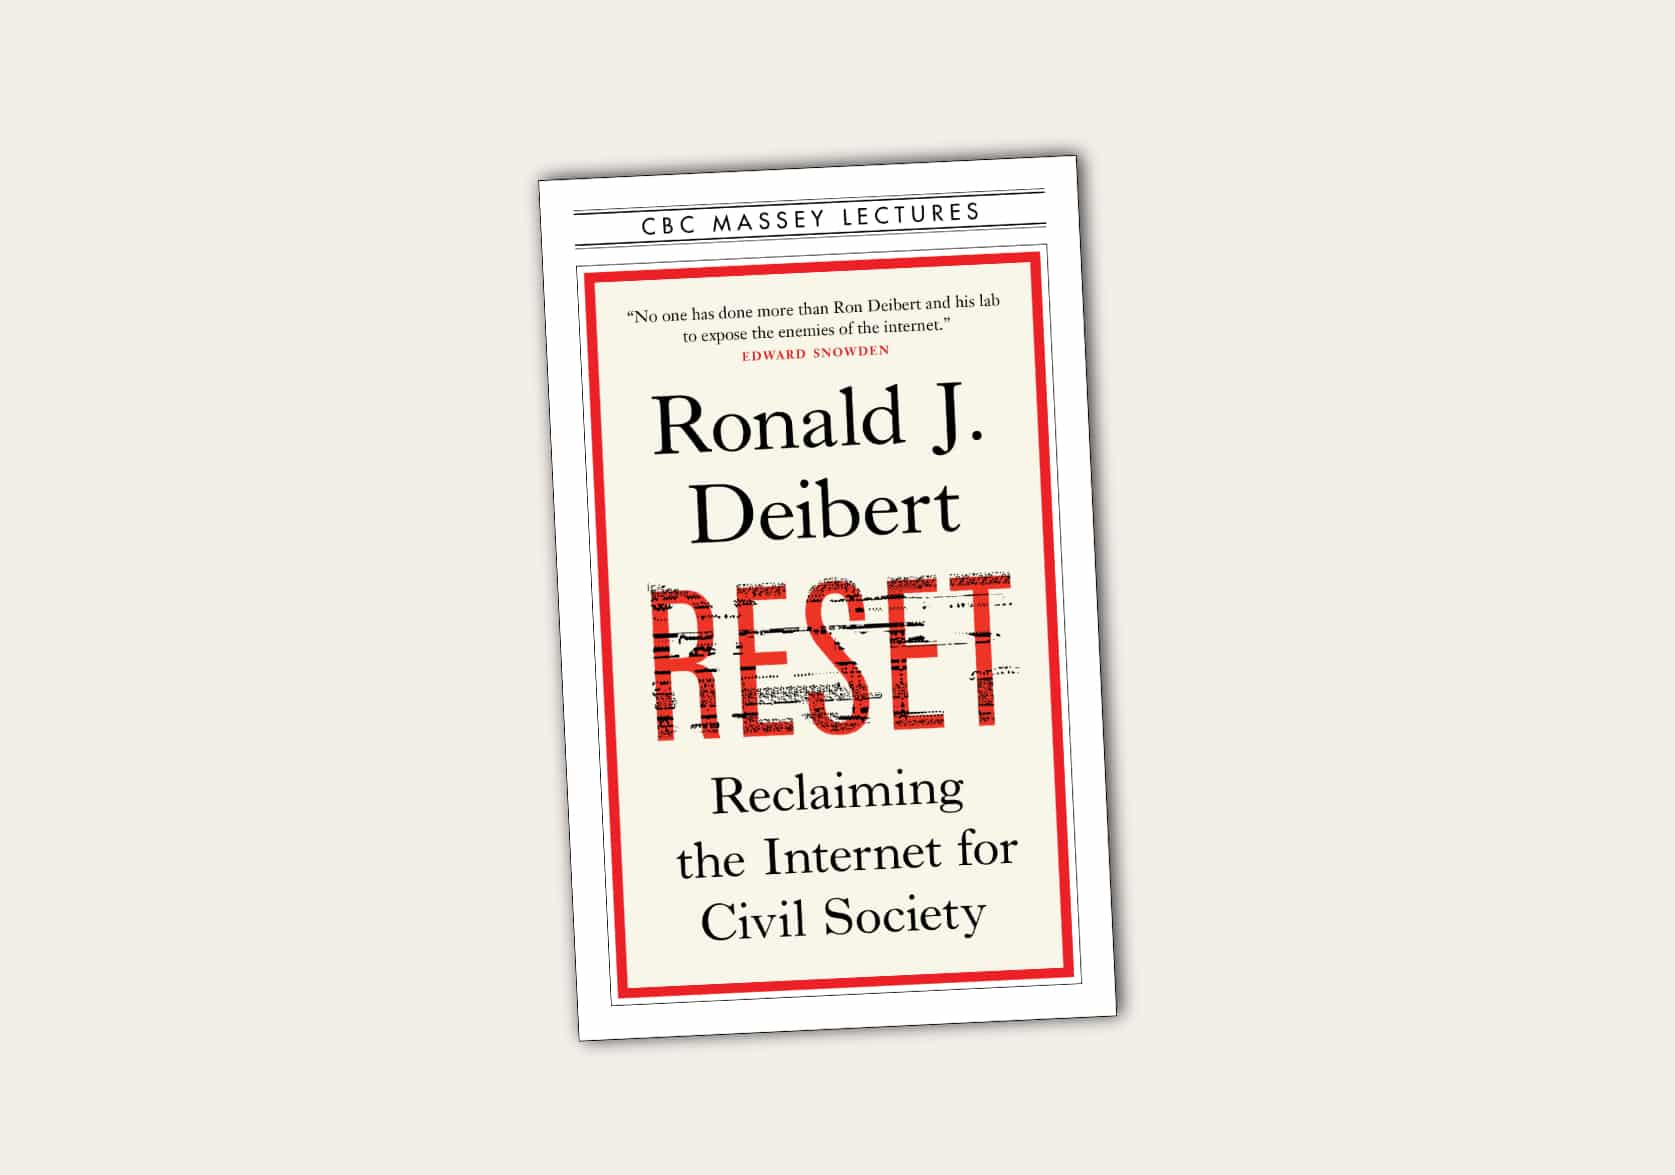 Reset: Reclaiming the Internet for Civil Society by Ronald Deibert. CBC Massey Lectures.